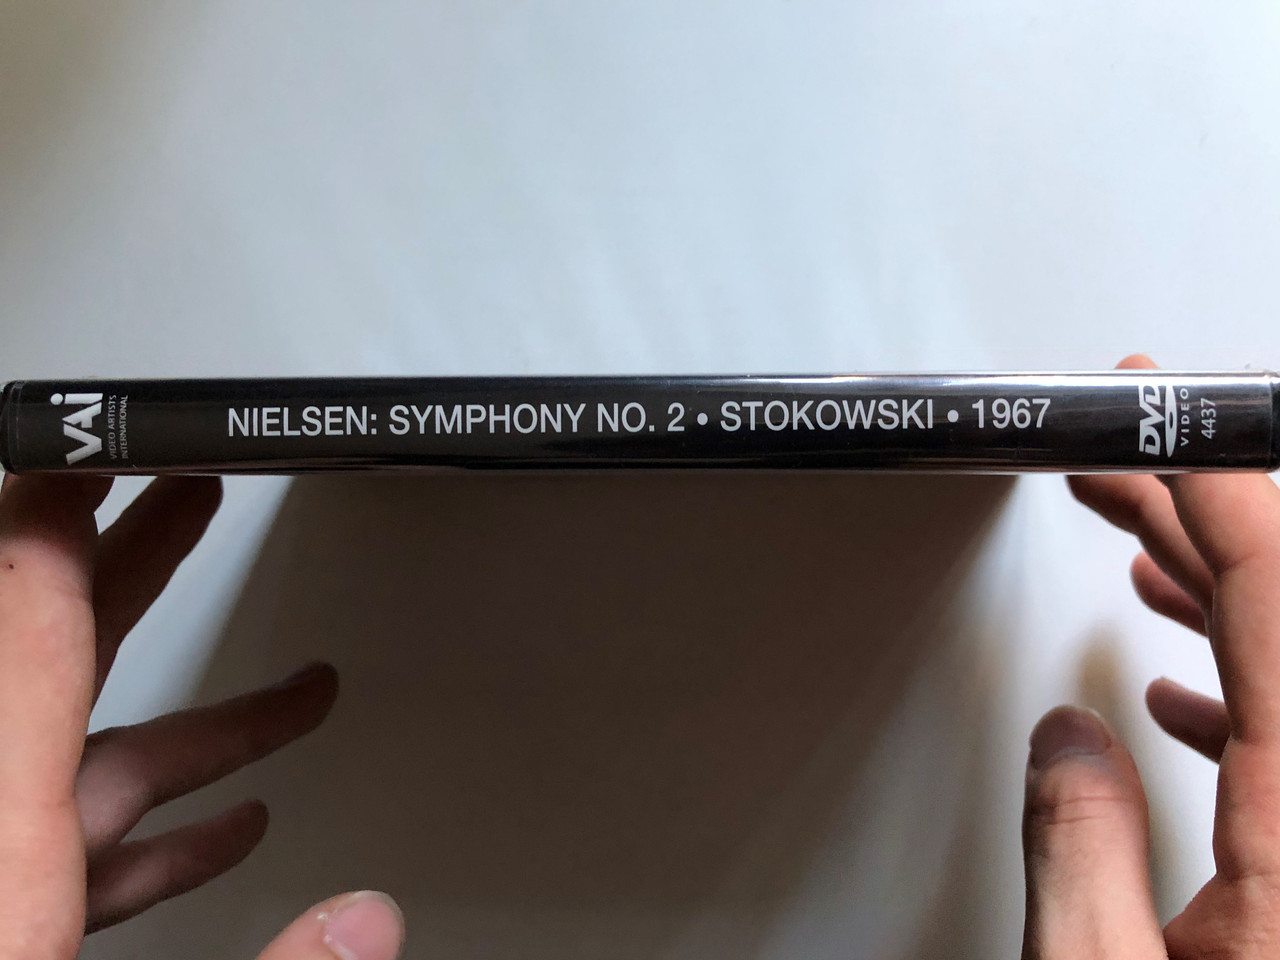 Nielsen_Symphony_No._2_The_Four_Temperaments_Leopold_Stokowski_Conducts_Nielsen_Danish_National_Symphony_Orchestra_Live_performance_1967_Leopold_Stokowski_talks_with_Hans_1__25568.1691897323.1280.1280.JPG (1280×960)